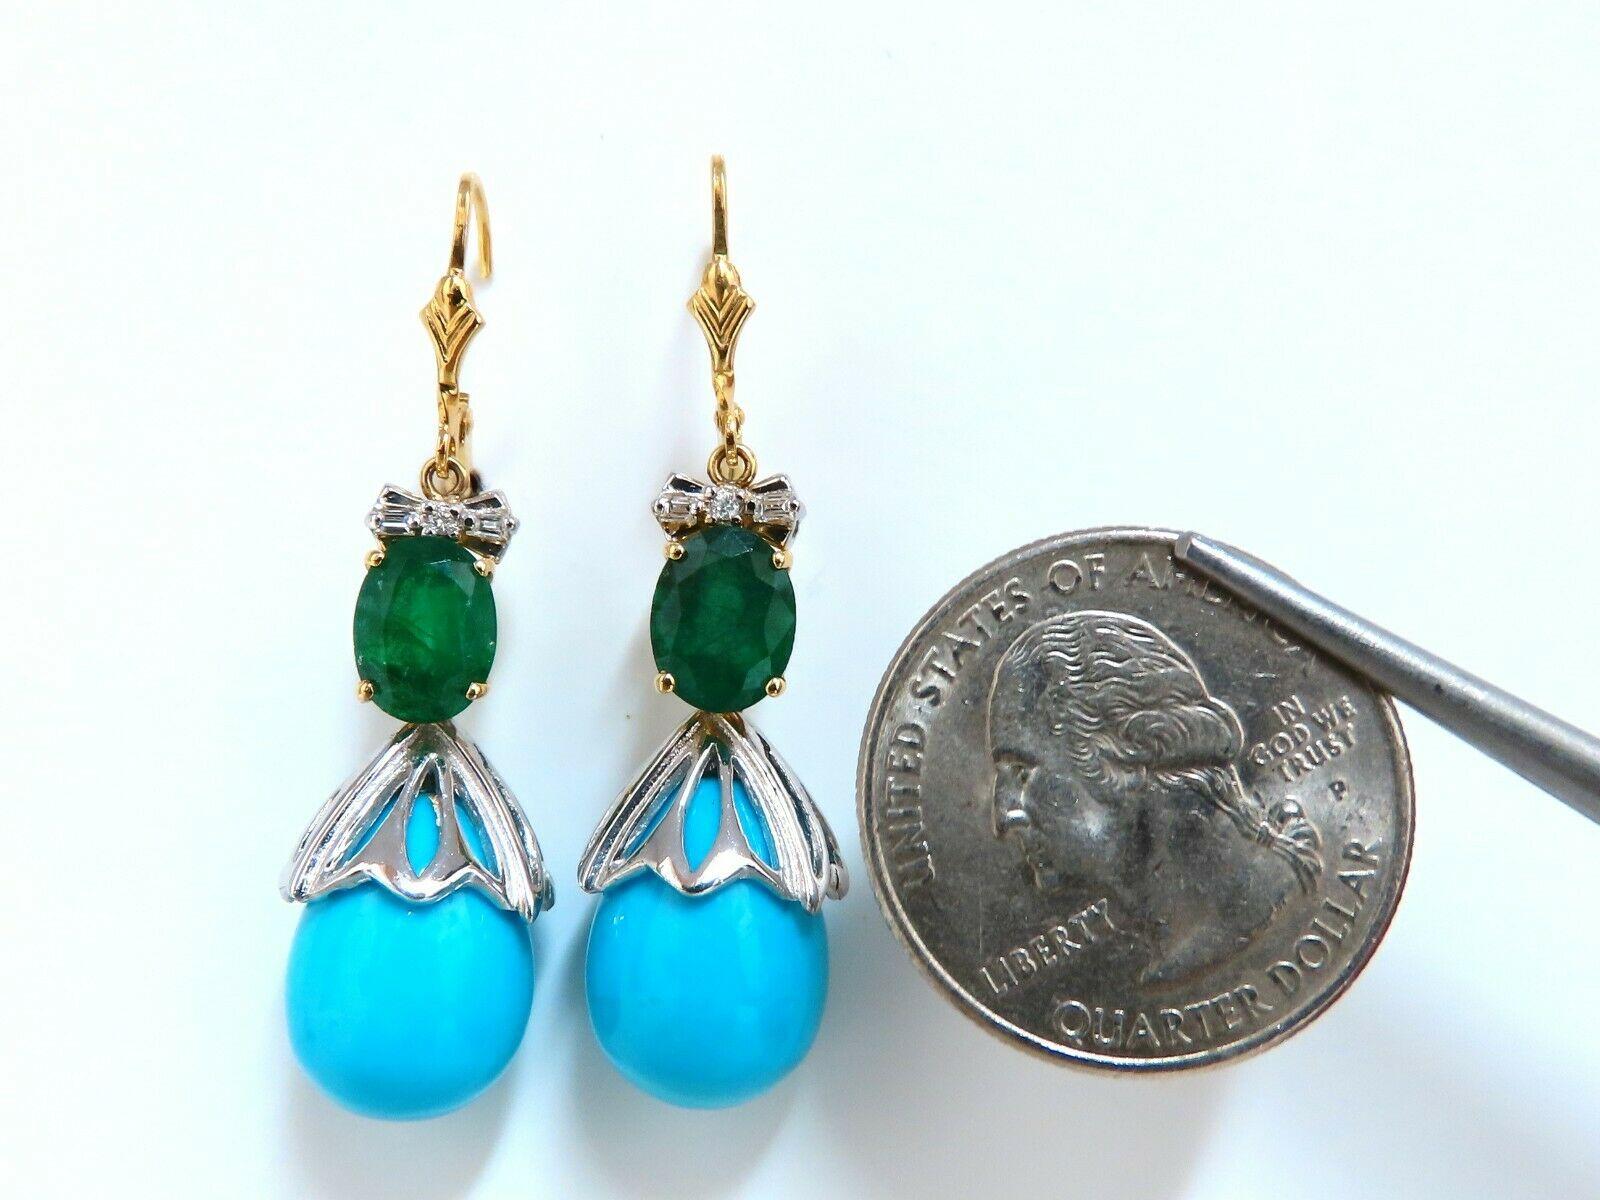 Parisian Retro Redux

Emerald, Turquoise & Diamonds Dangle Earrings.

3.00ct. Natural (2) Emeralds

Emeralds: Oval brilliant cuts.

Transparent & Even Green tone.

Ranging: 8.8 X 6.7 mm

.20cts of round diamonds: 

H-color, Vs-2 clarity.

16x13 mm